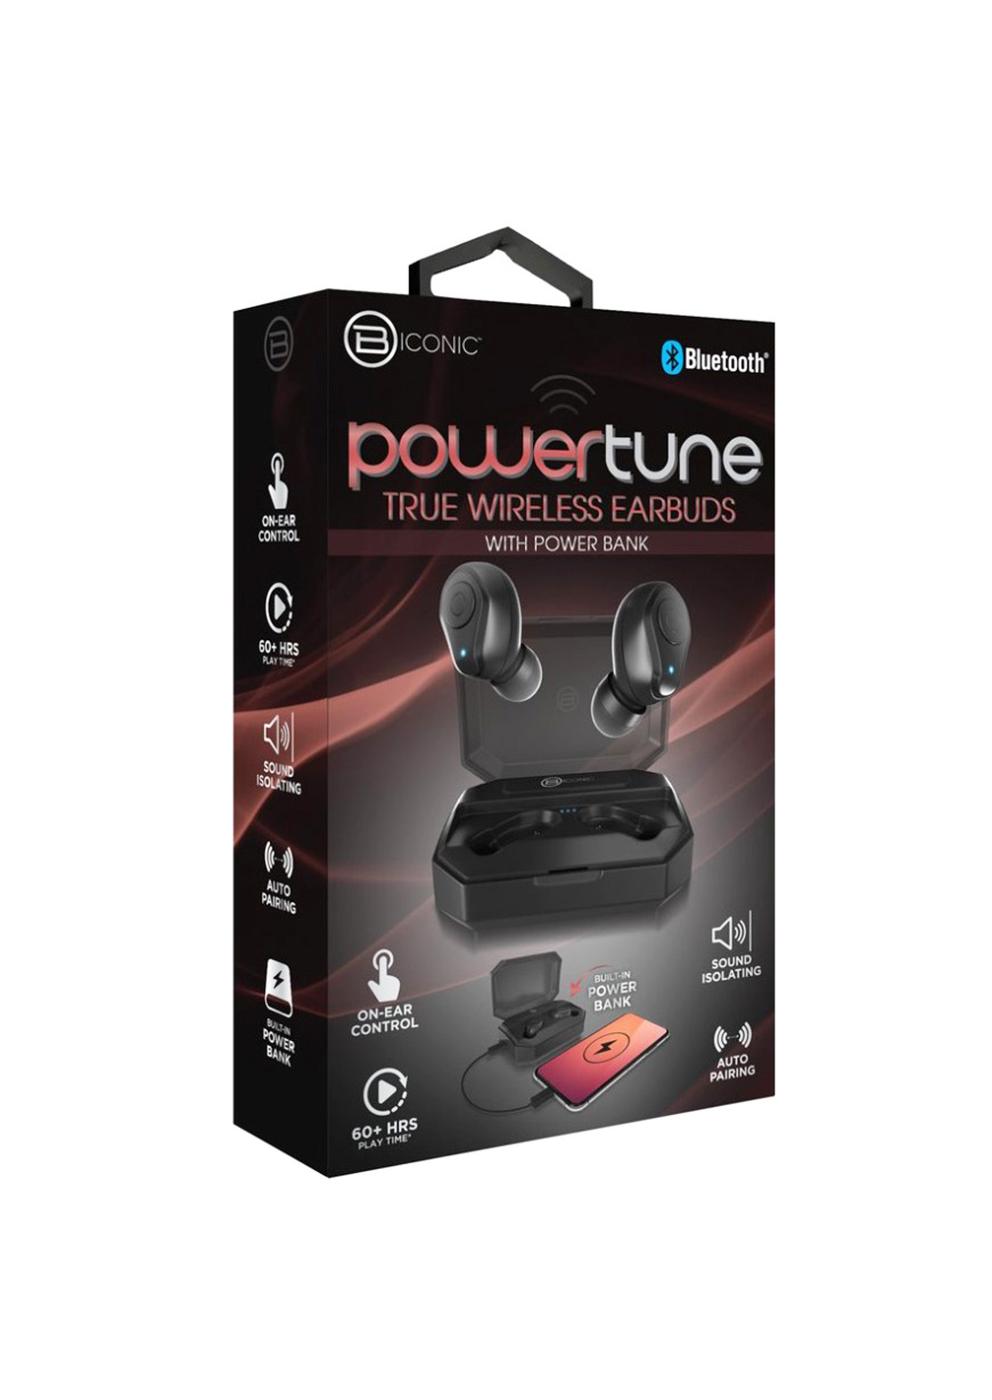 Biconic PowerTune True Wireless Earbuds with Power Bank - Black; image 1 of 2